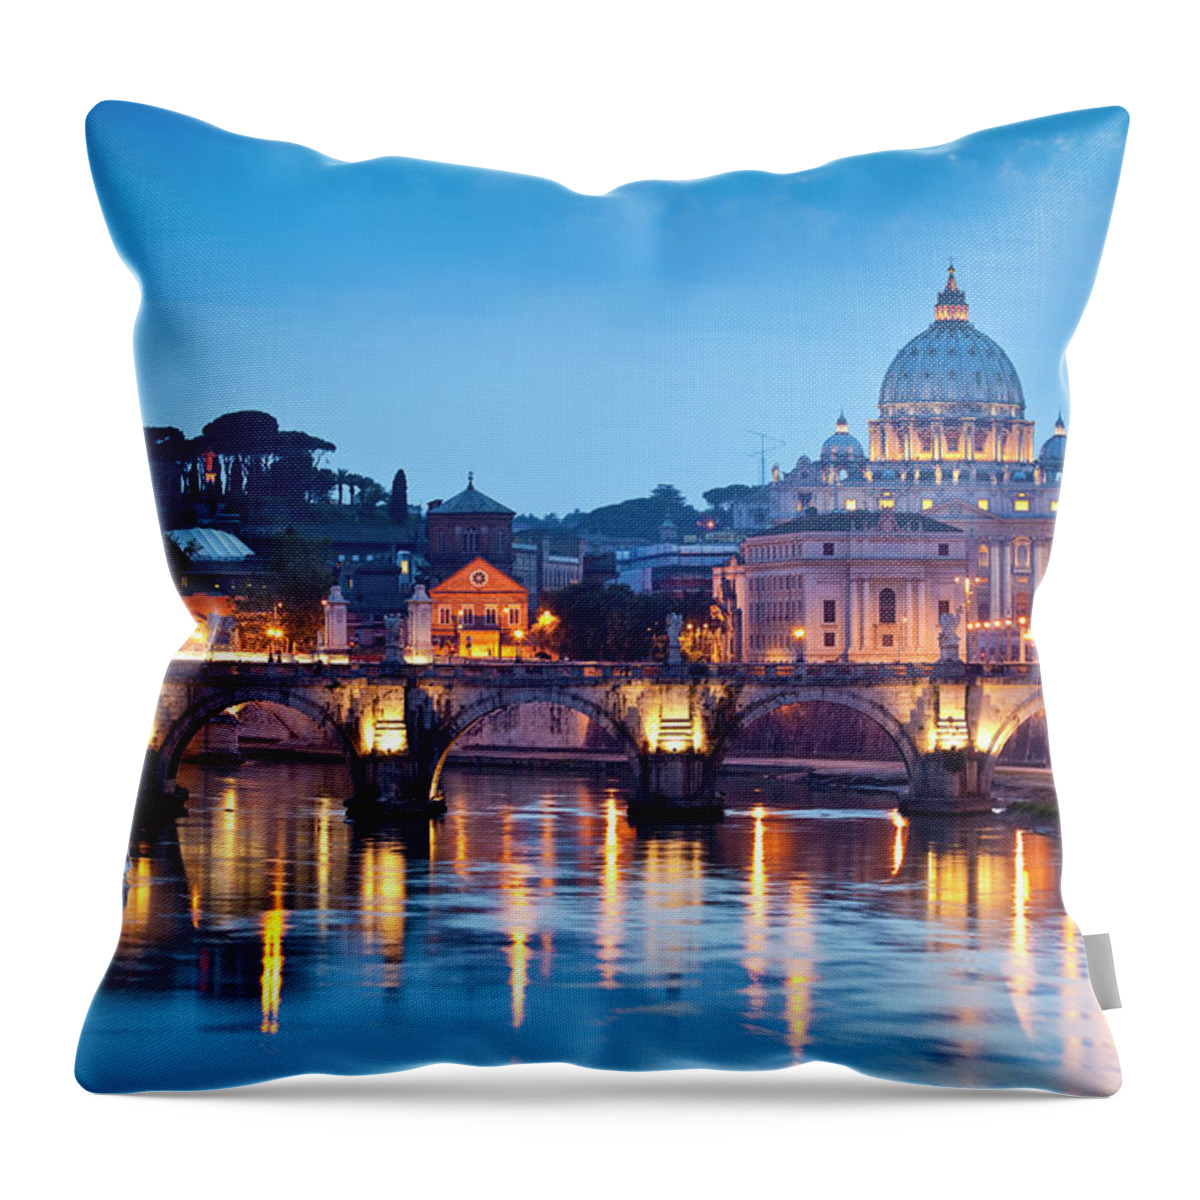 Arch Throw Pillow featuring the photograph St Peters Basilica And Pont Santangelo by Richard I'anson